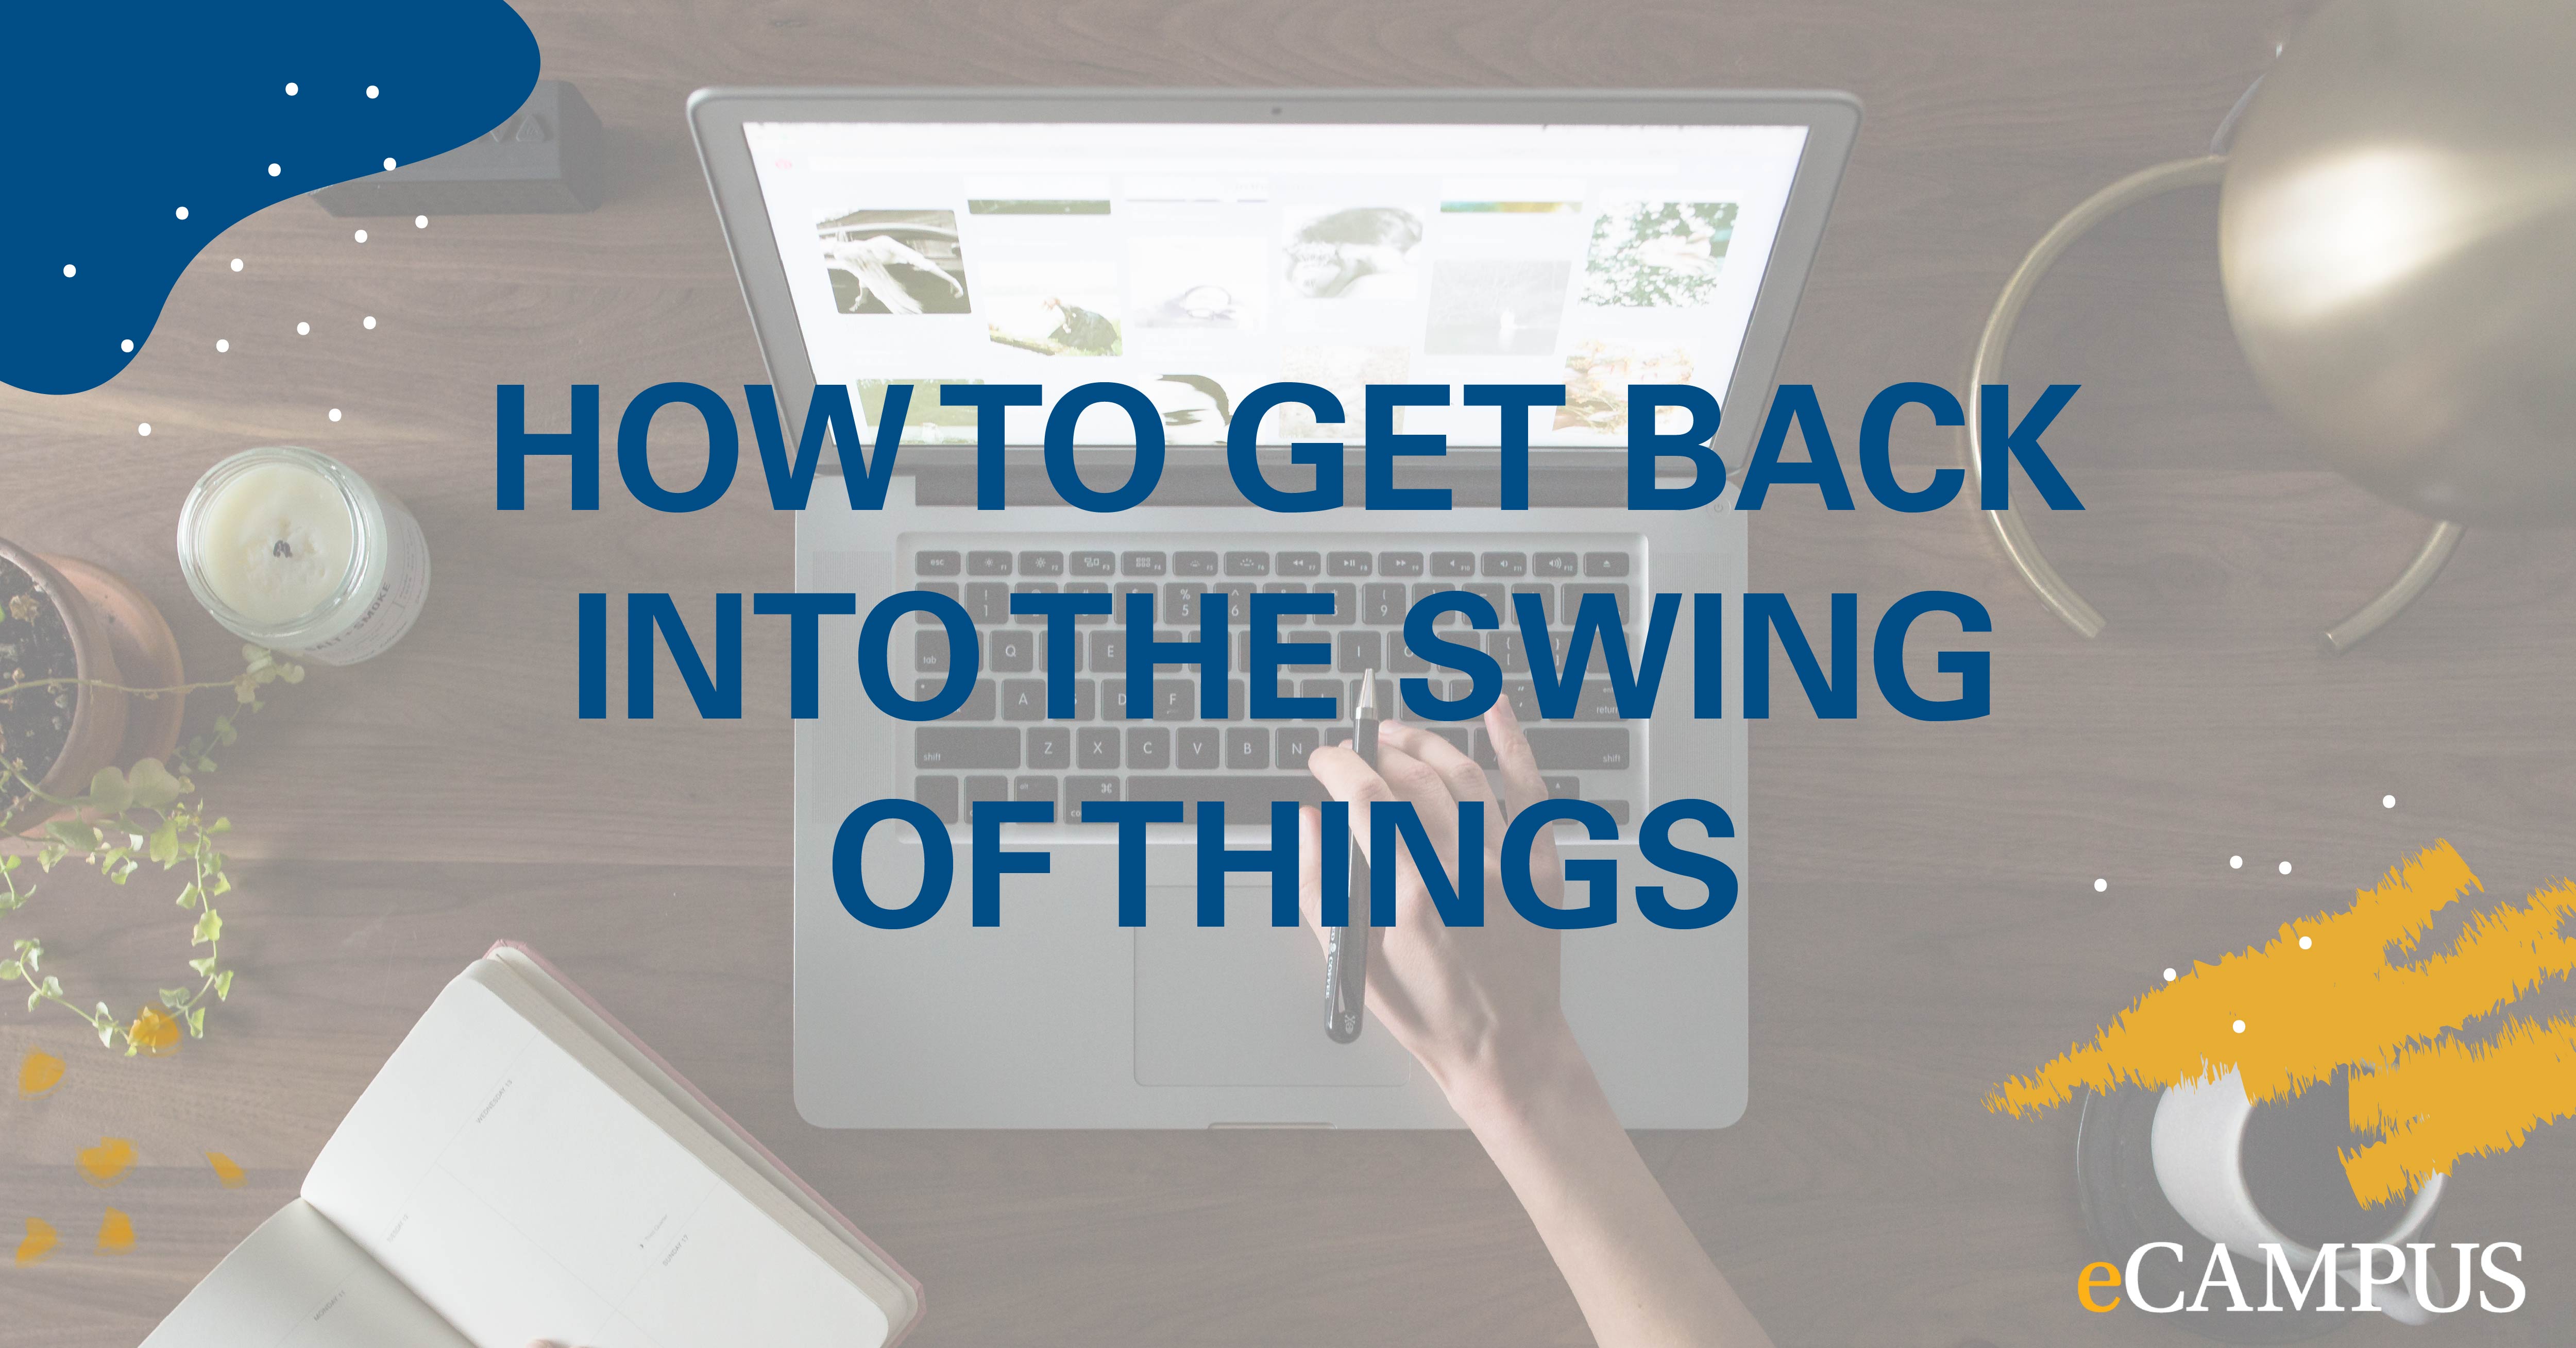 How To Get Back Into the Swing of Things